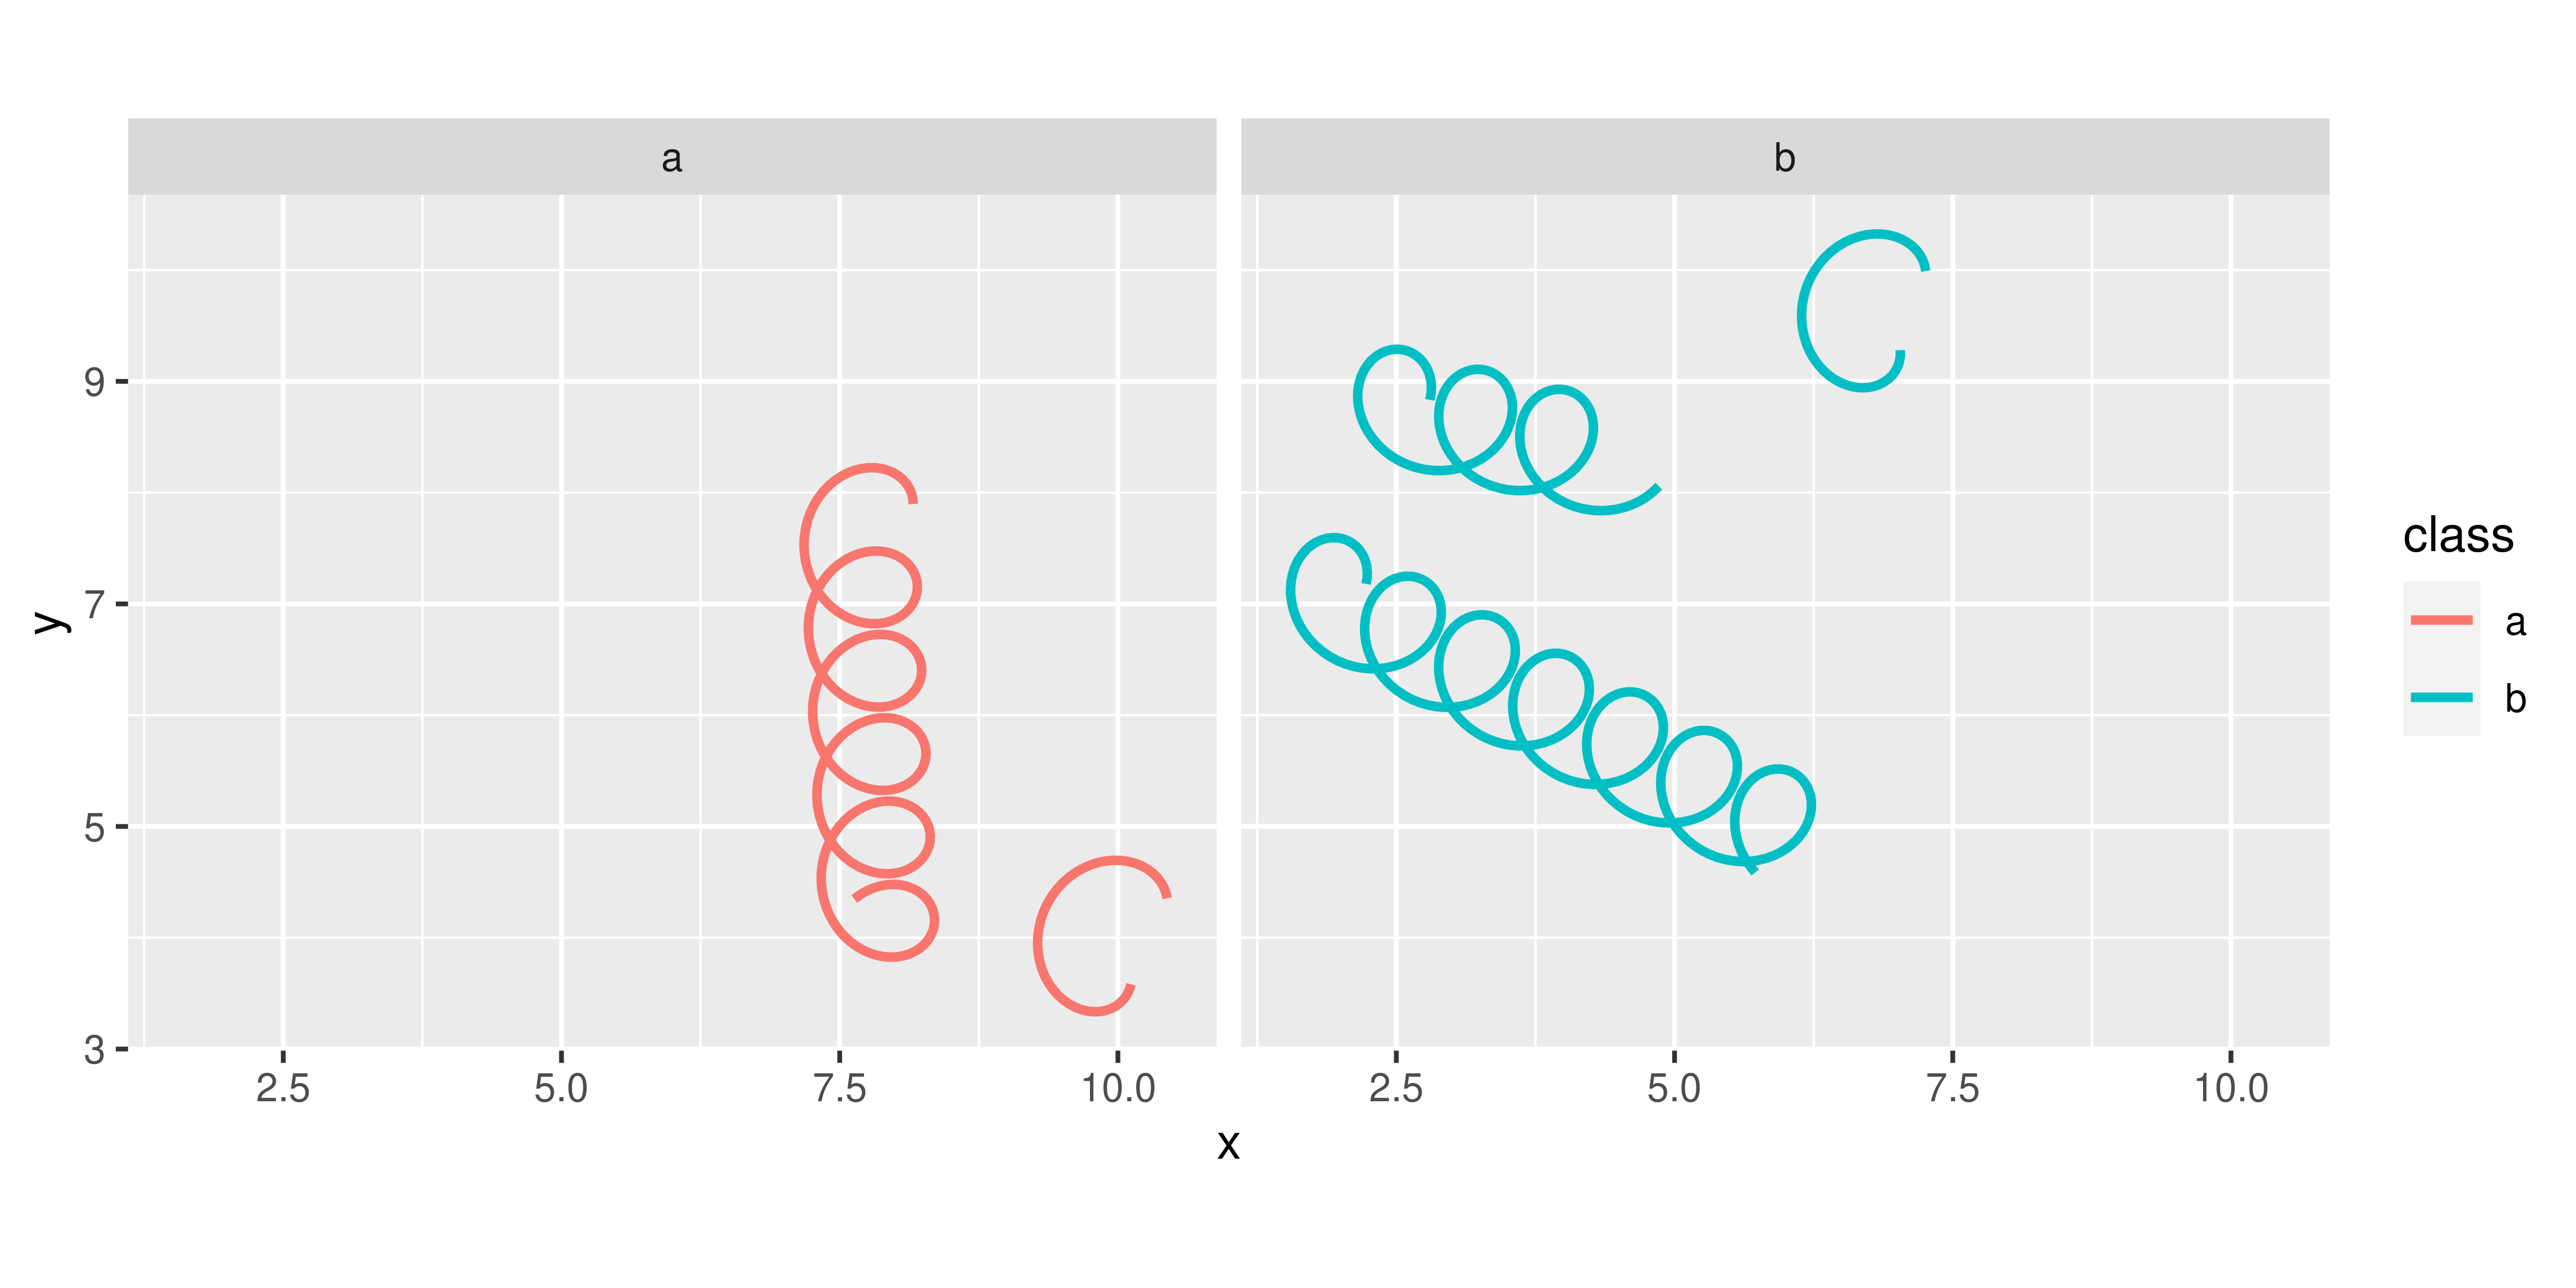 https://ggplot2-book.org/ext-springs_files/figure-html/unnamed-chunk-15-1.png